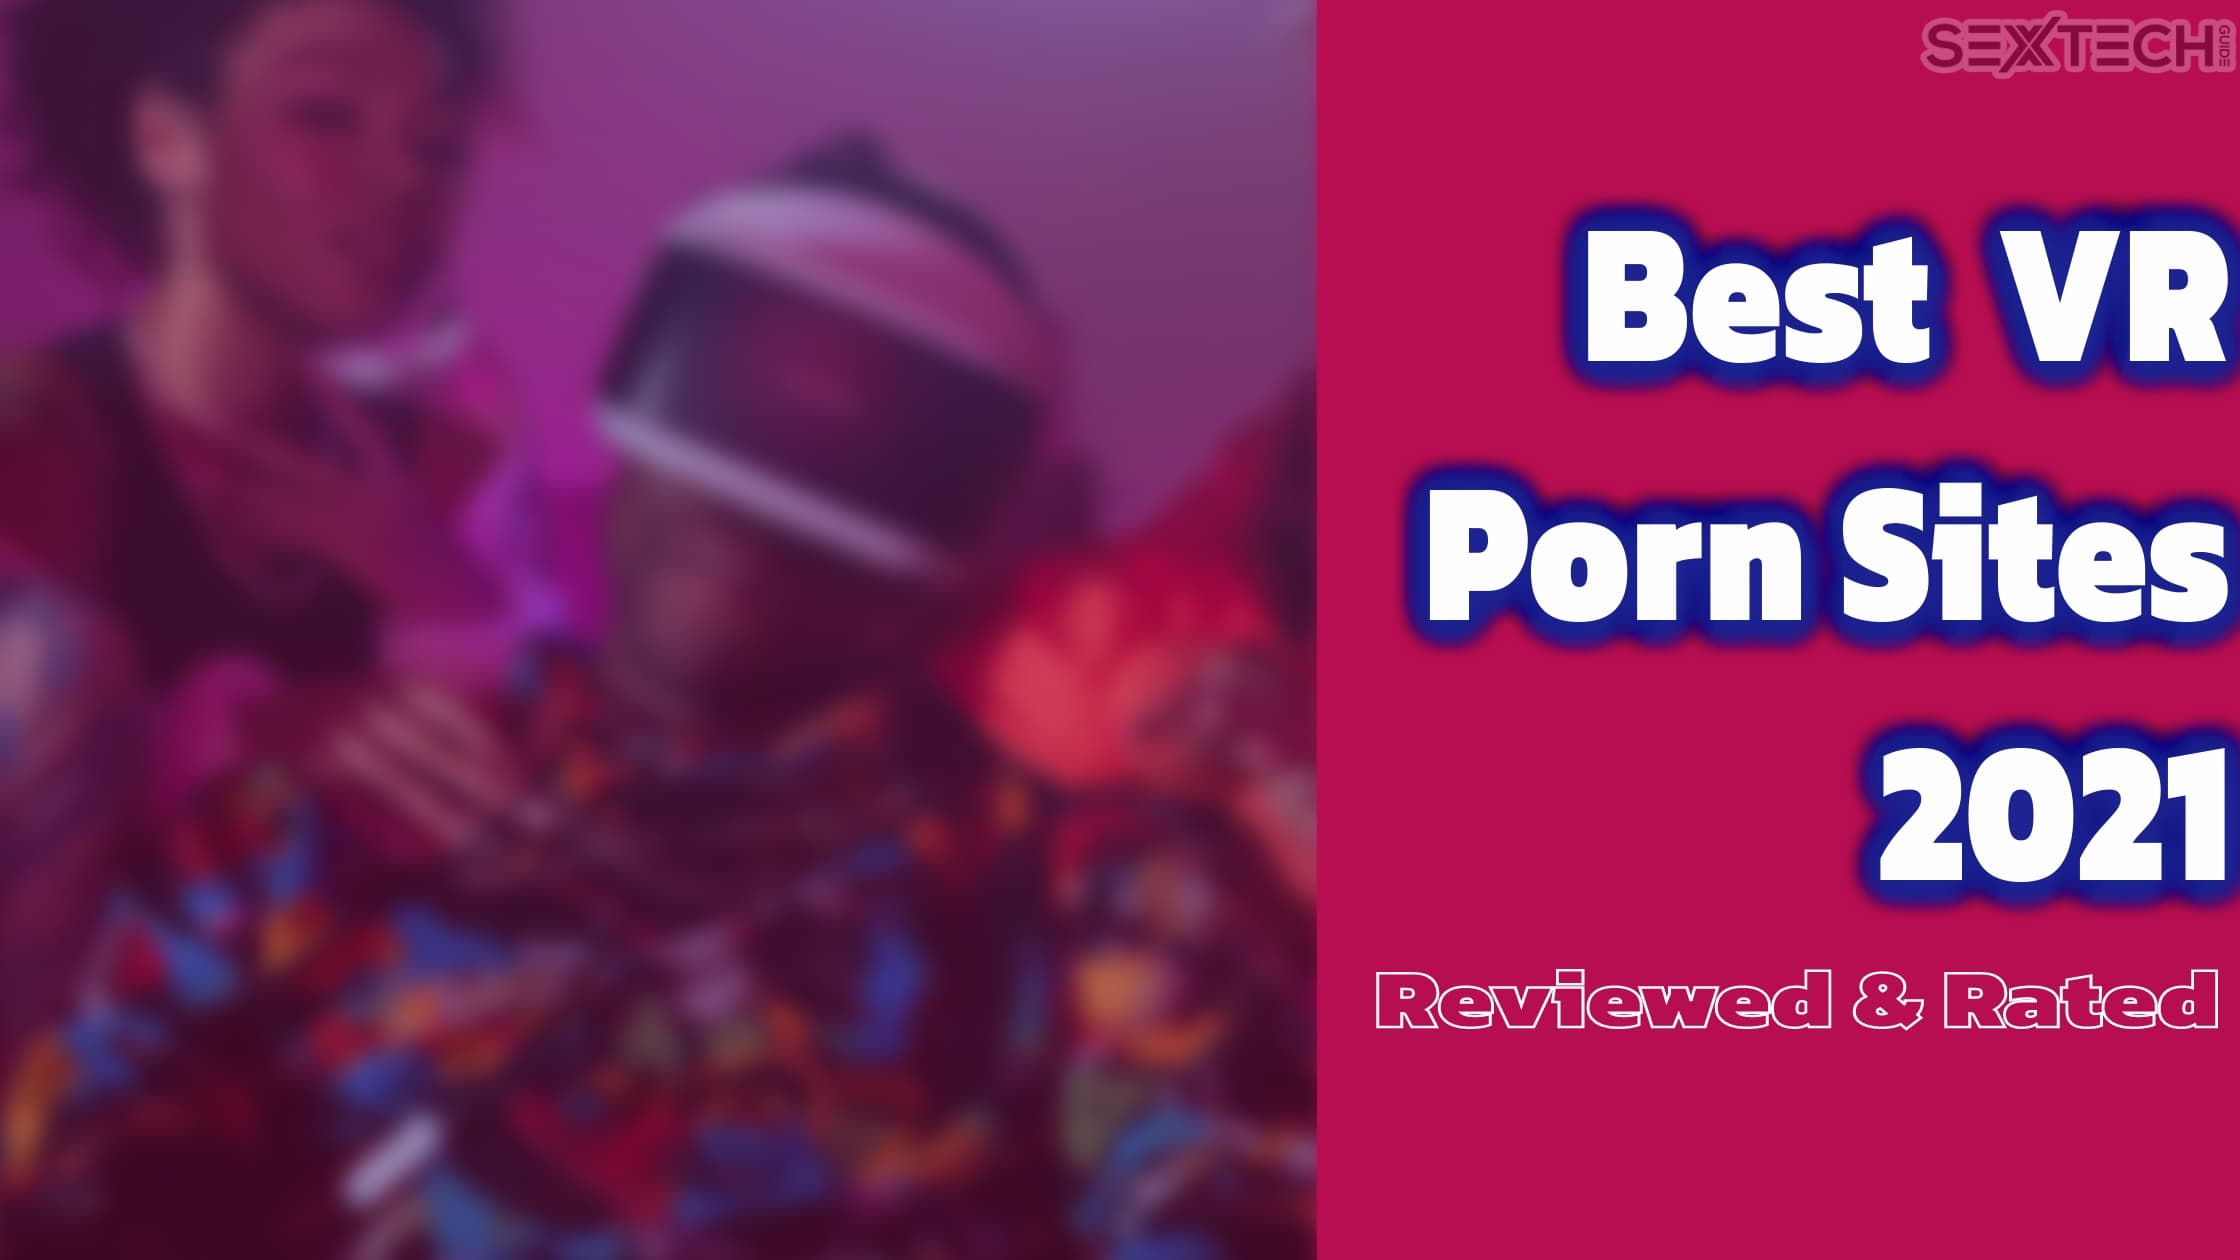 2 days access for only $1 porn ad